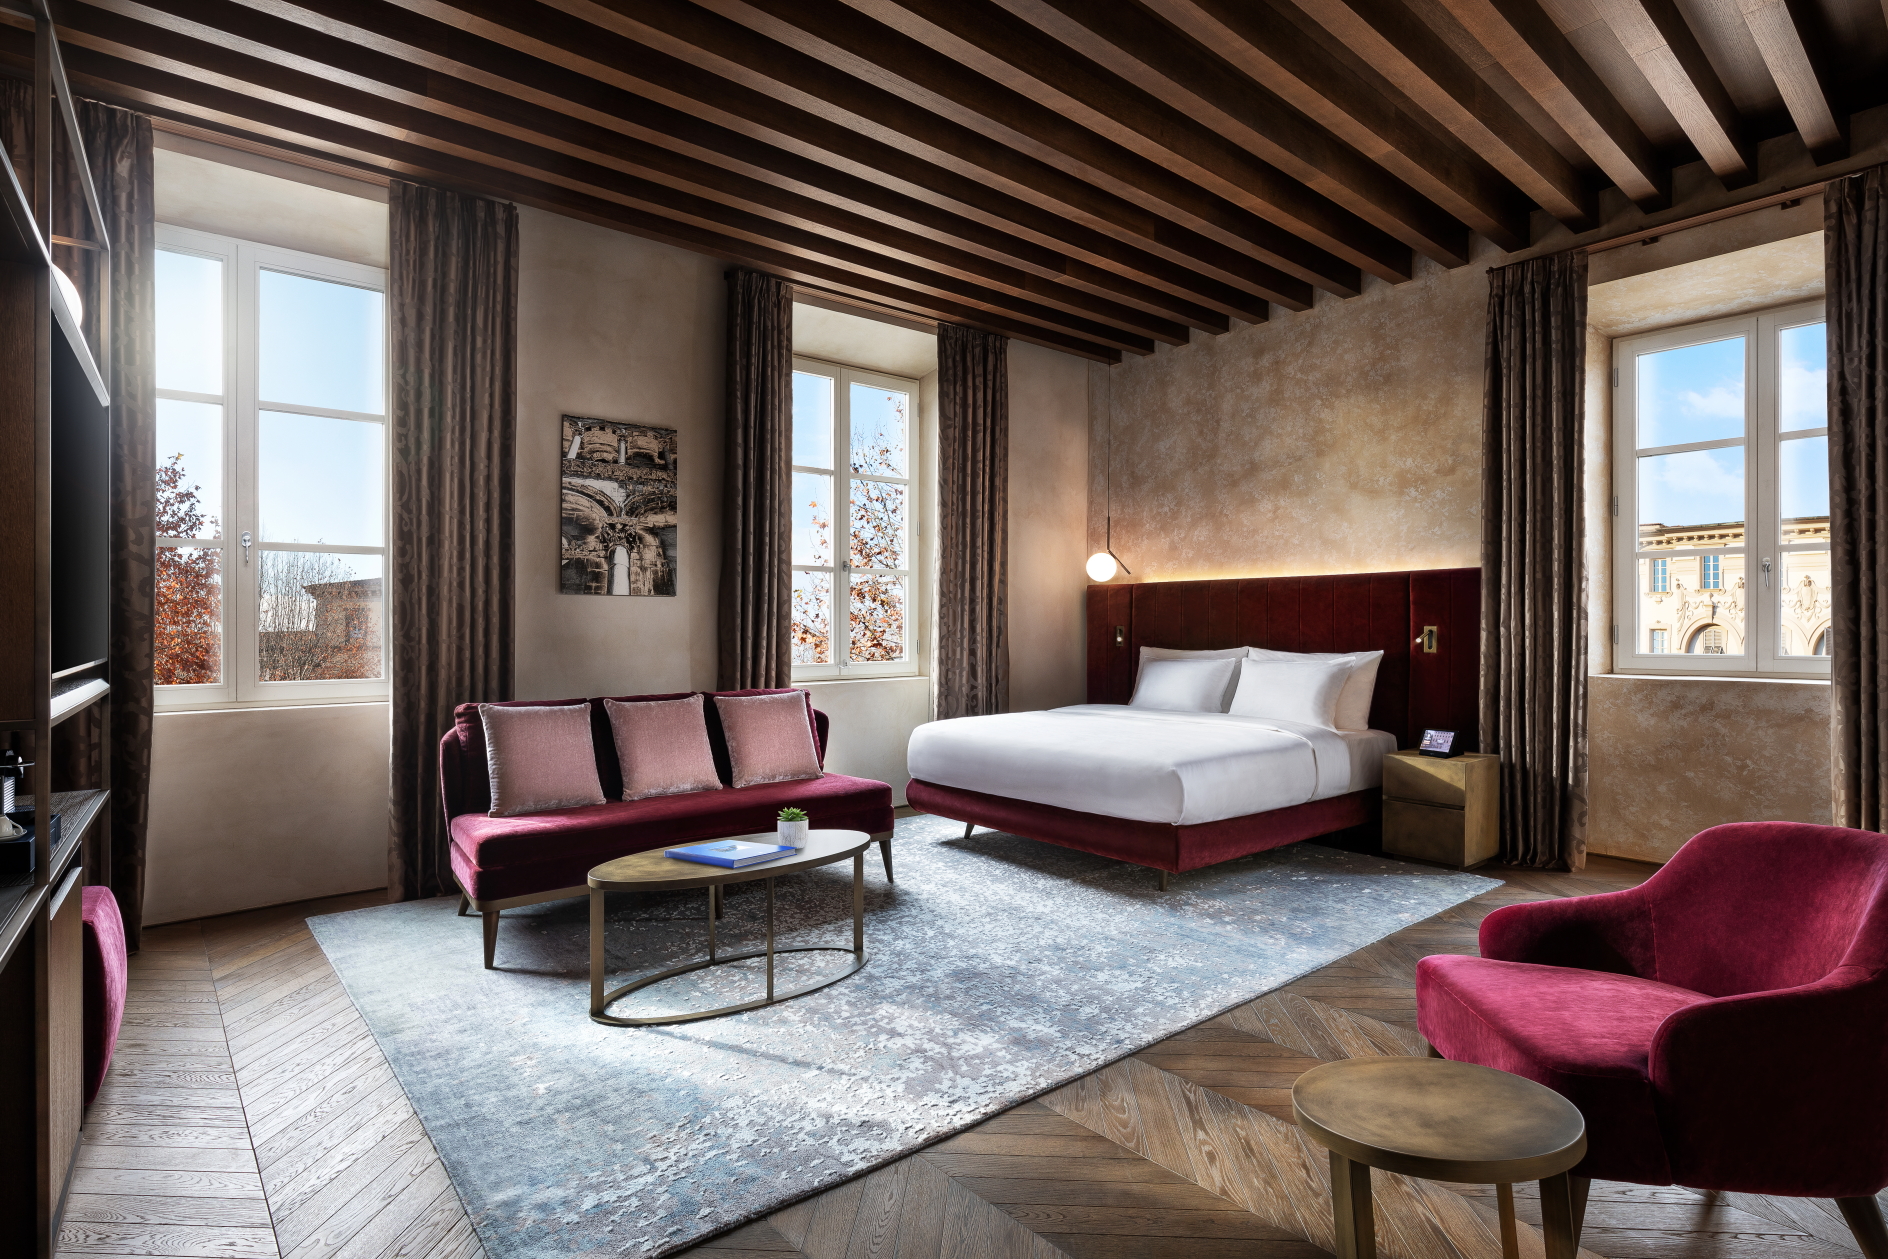 Marriott has expanded the portfolio of its Autograph Collection of hotels with the opening of a former 16th Century Palazzo, Grand Universe Lucca in Italy. Click to enlarge.